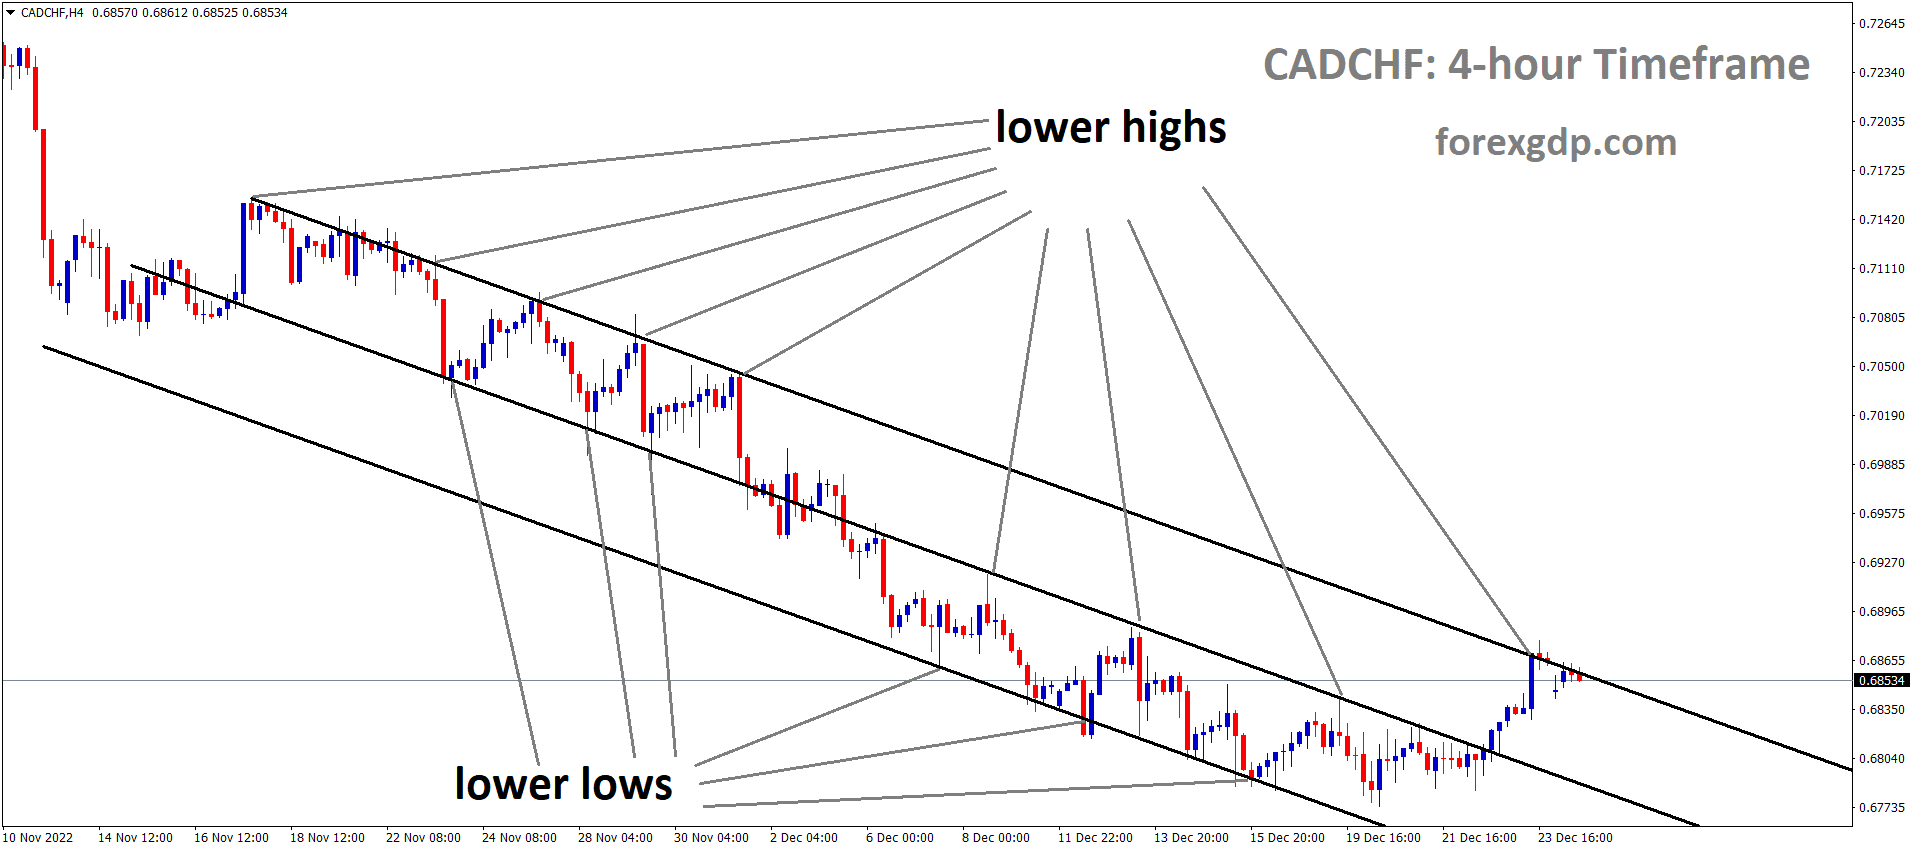 CADCHF is moving in the Descending channel and the market has fallen from the lower high area of the channel 1